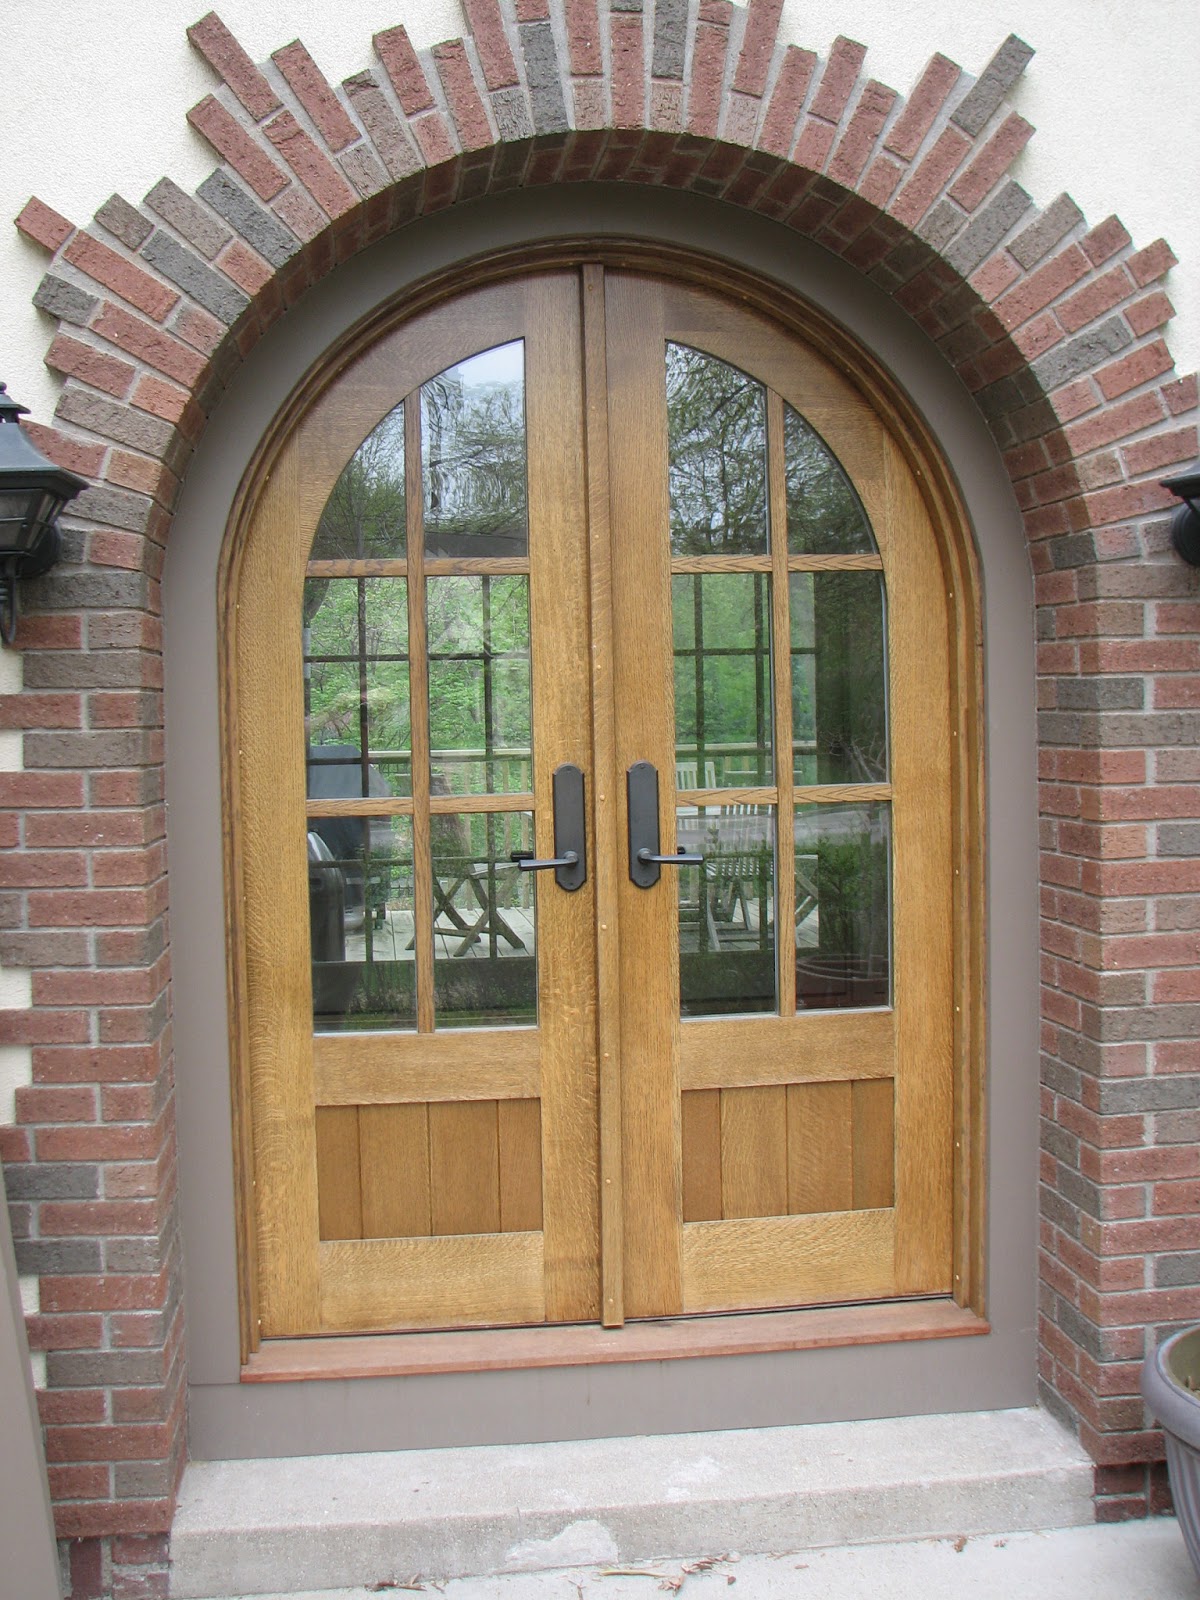 Custom made arched screen doors - woodcarving artwork woodworking craftsman